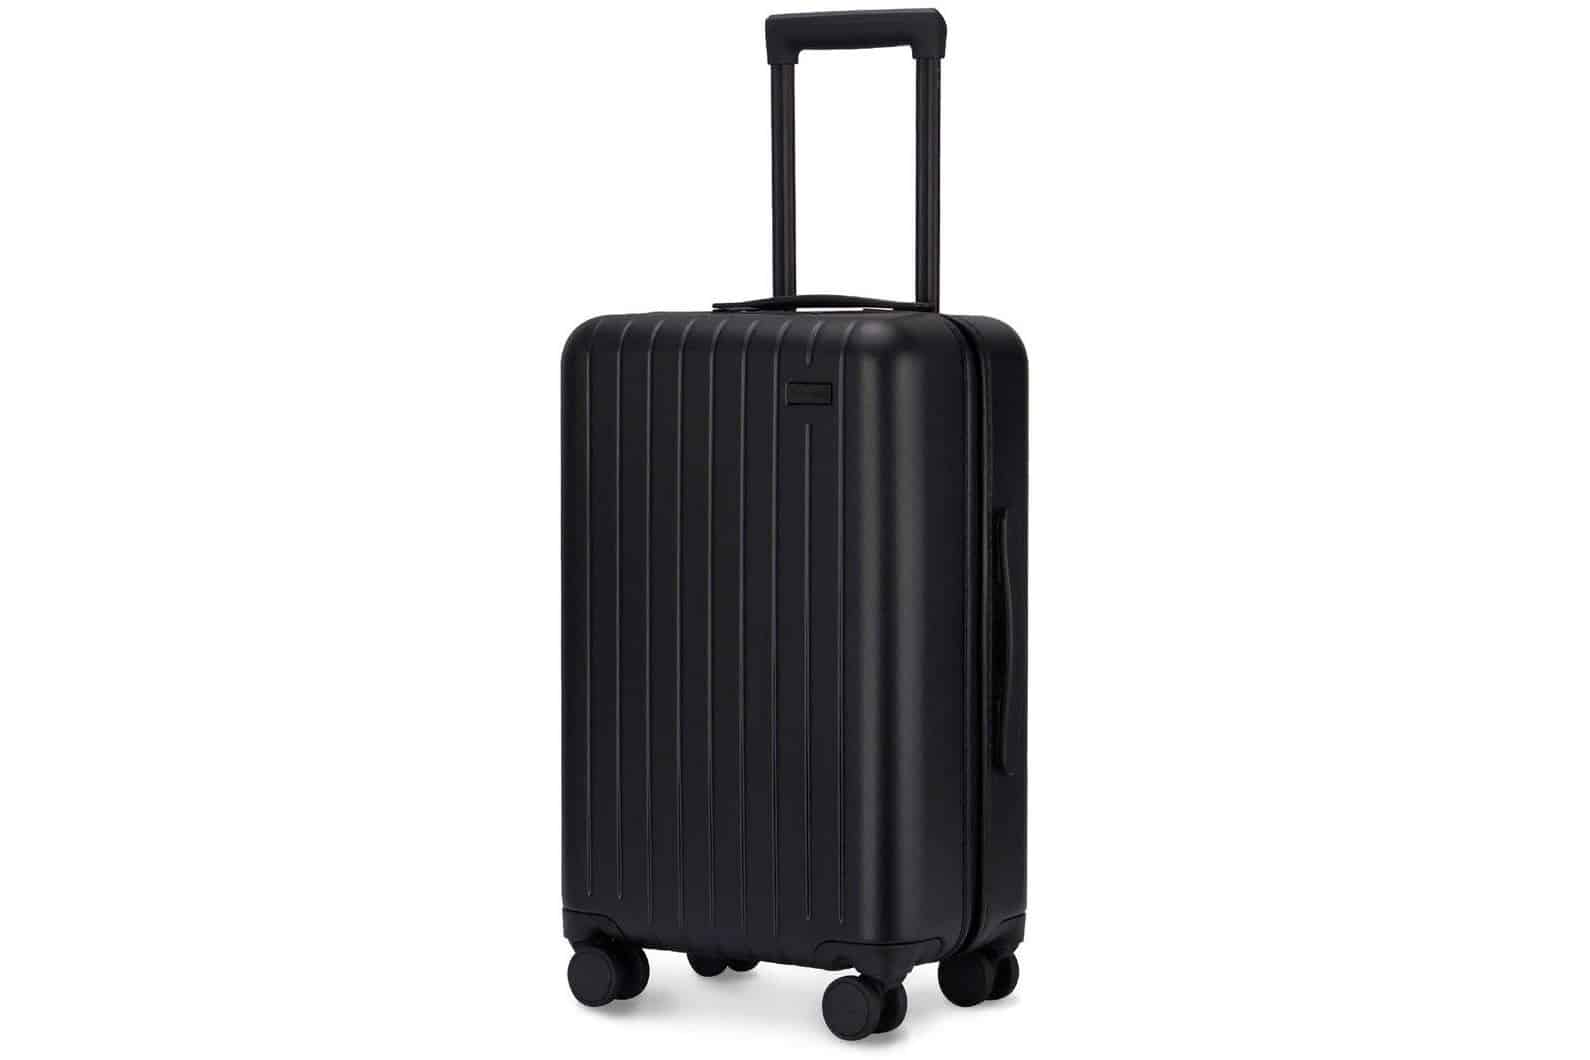 GoPenguin Carry-on Luggage